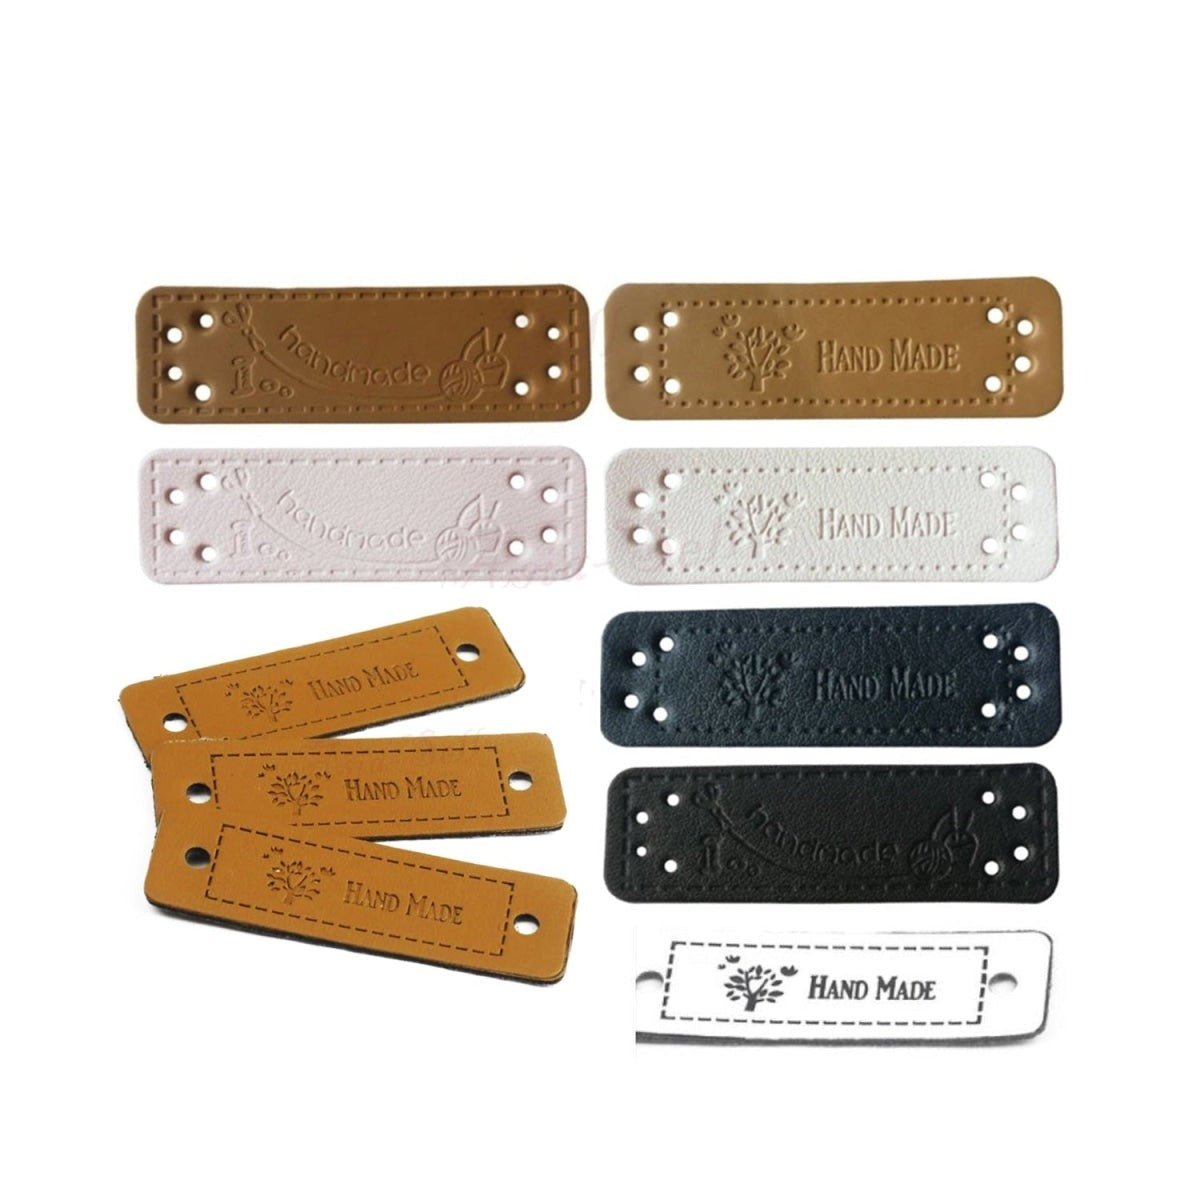 12x Sewing Tags Clothing Labels Faux Leather "Handmade" Clothes Bags DIY Hand Made - Mixed 1 - - Asia Sell